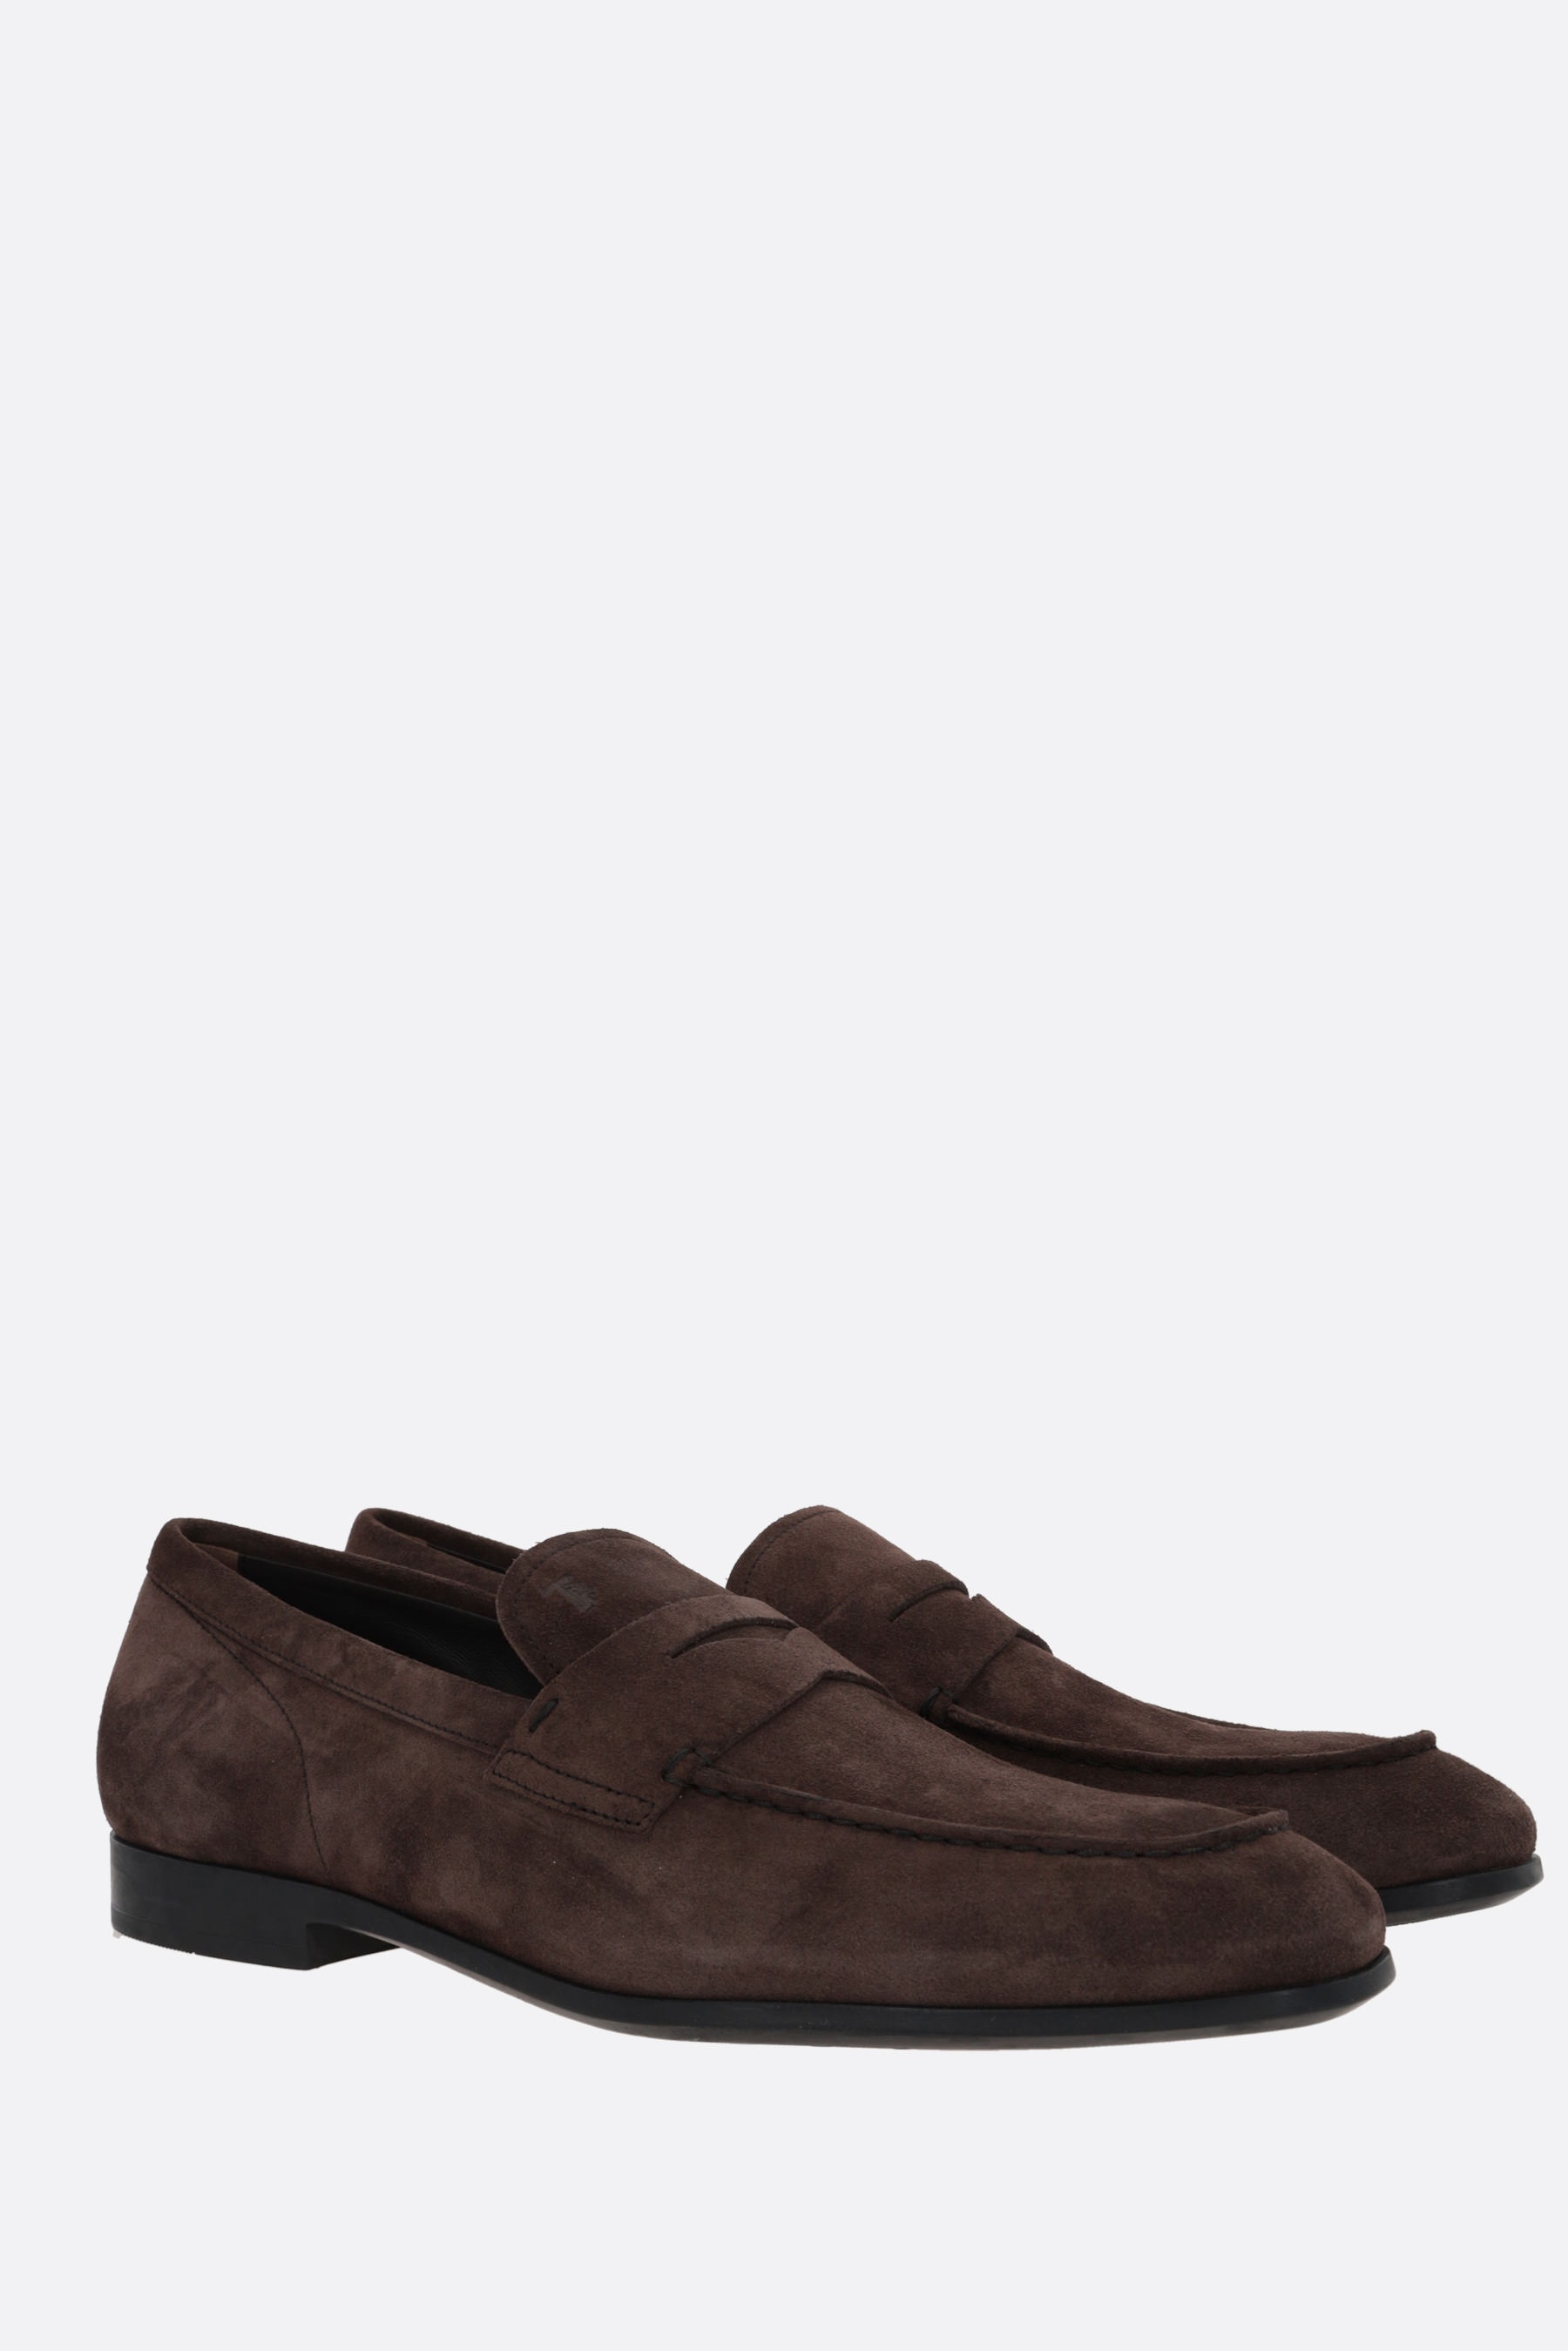 SUEDE LOAFERS - 3